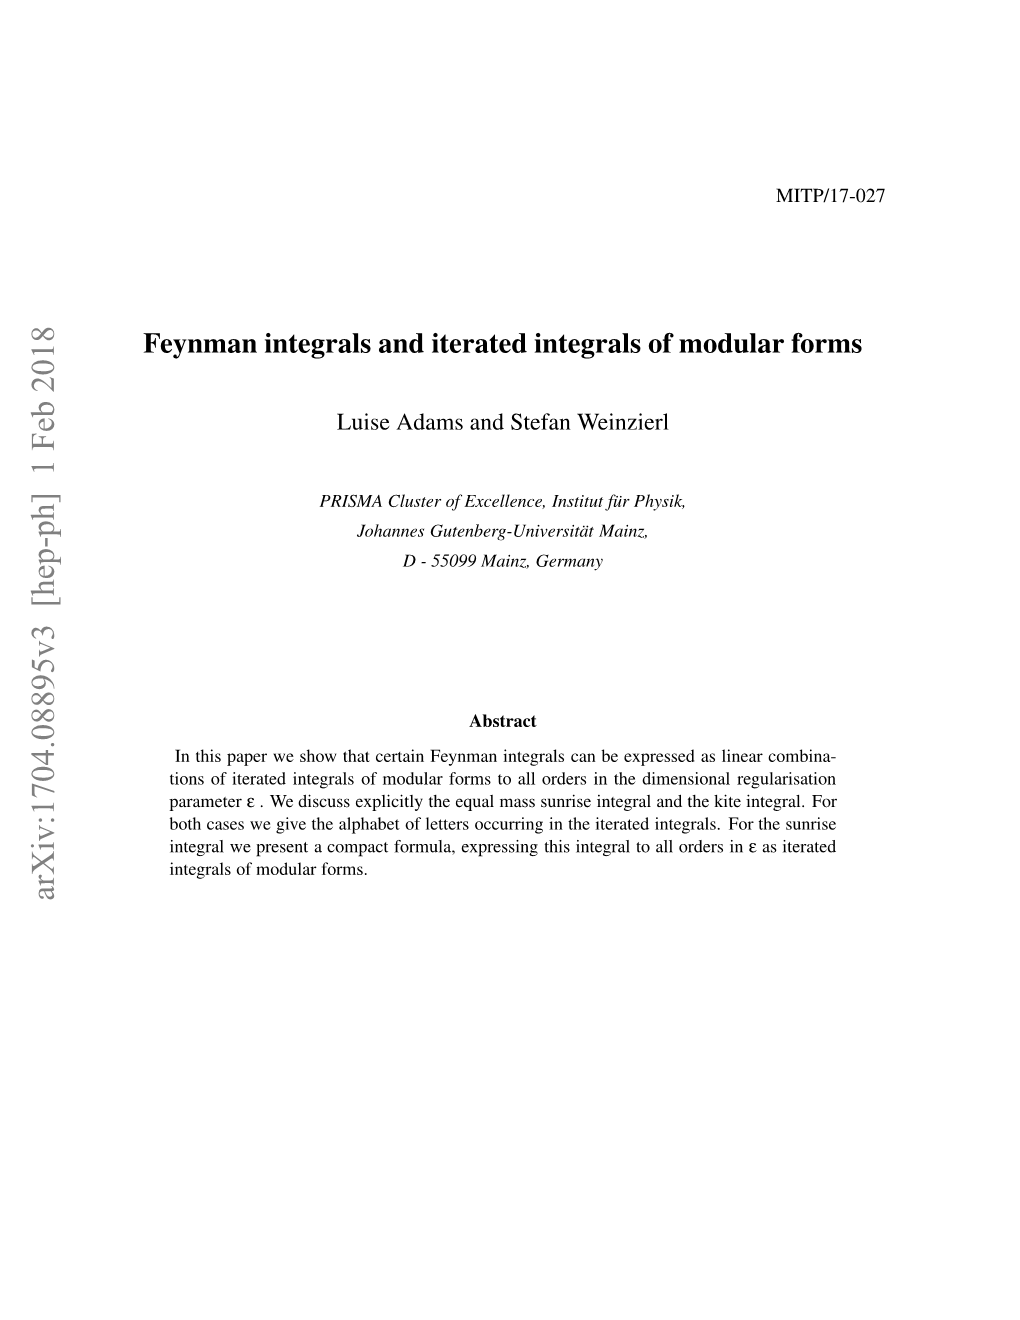 Feynman Integrals and Iterated Integrals of Modular Forms